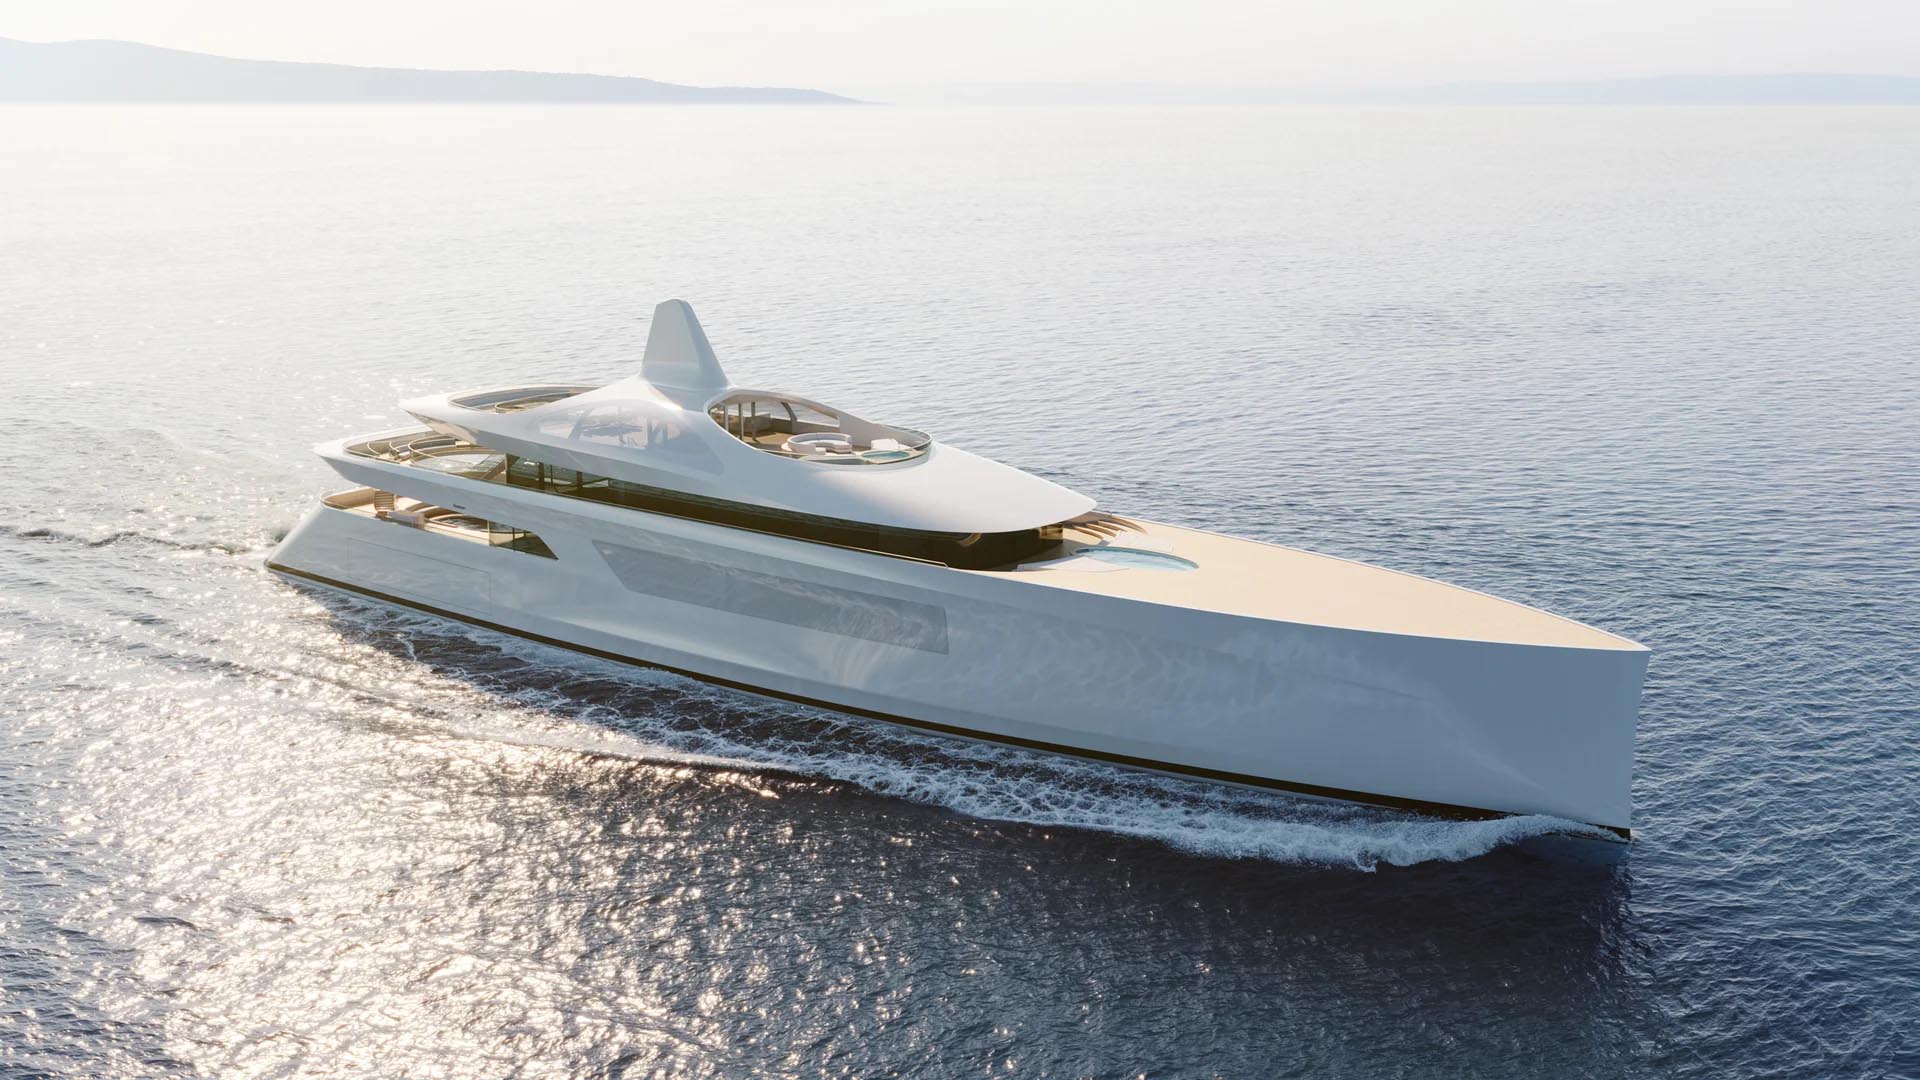 Feadship's eco-friendly superyacht design promoting sustainable yachting